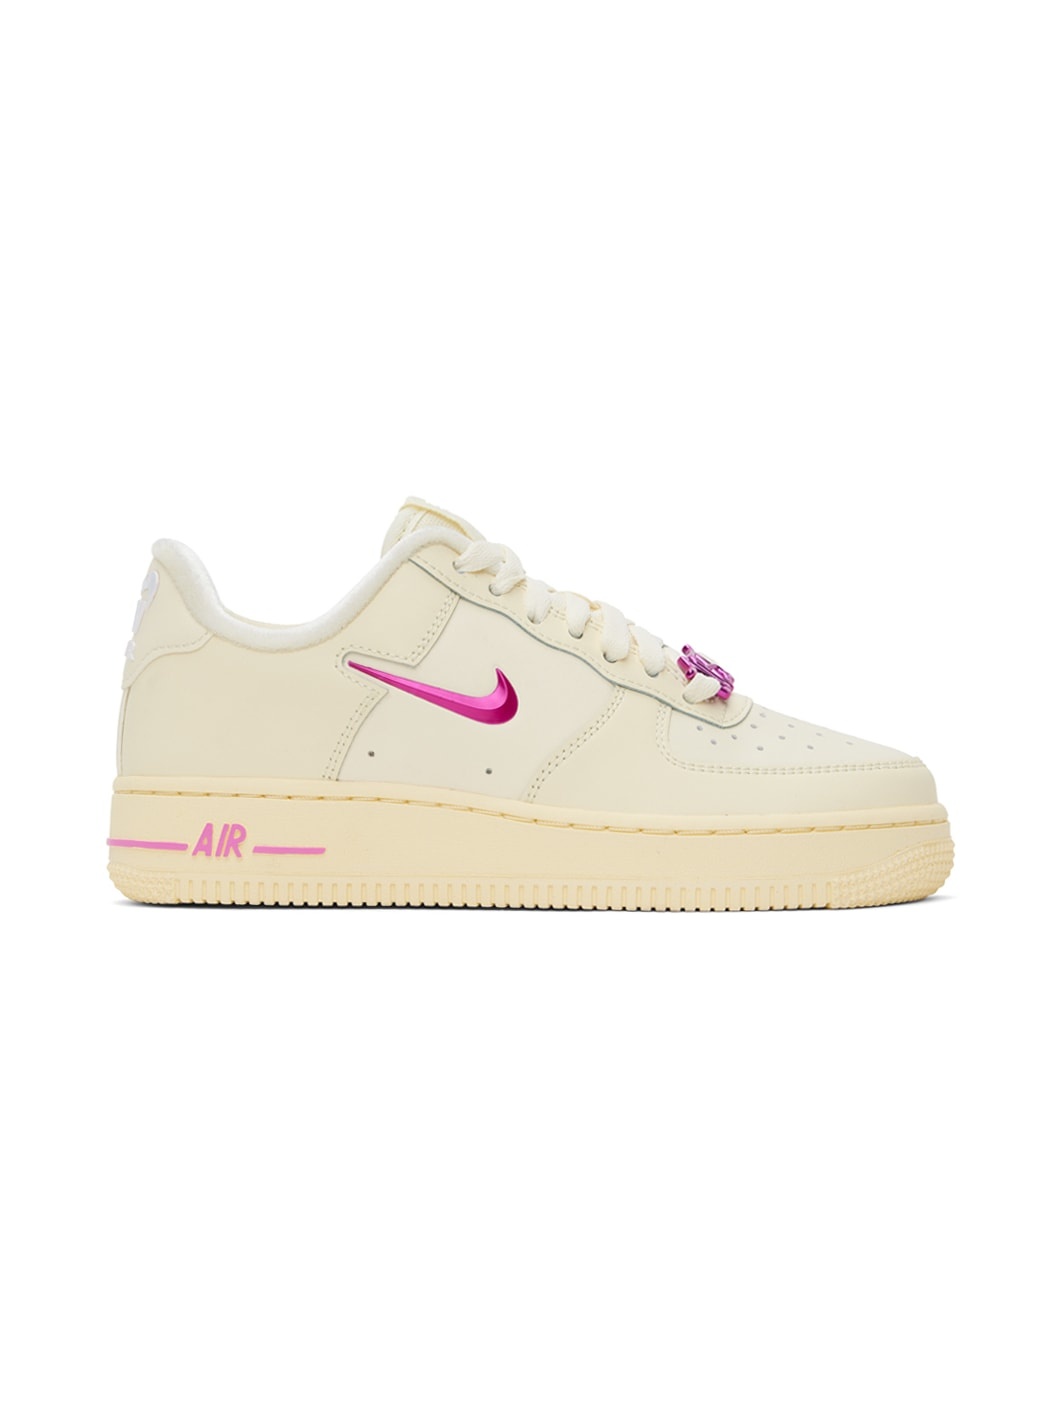 Off-White Air Force 1 '07 Sneakers - 1